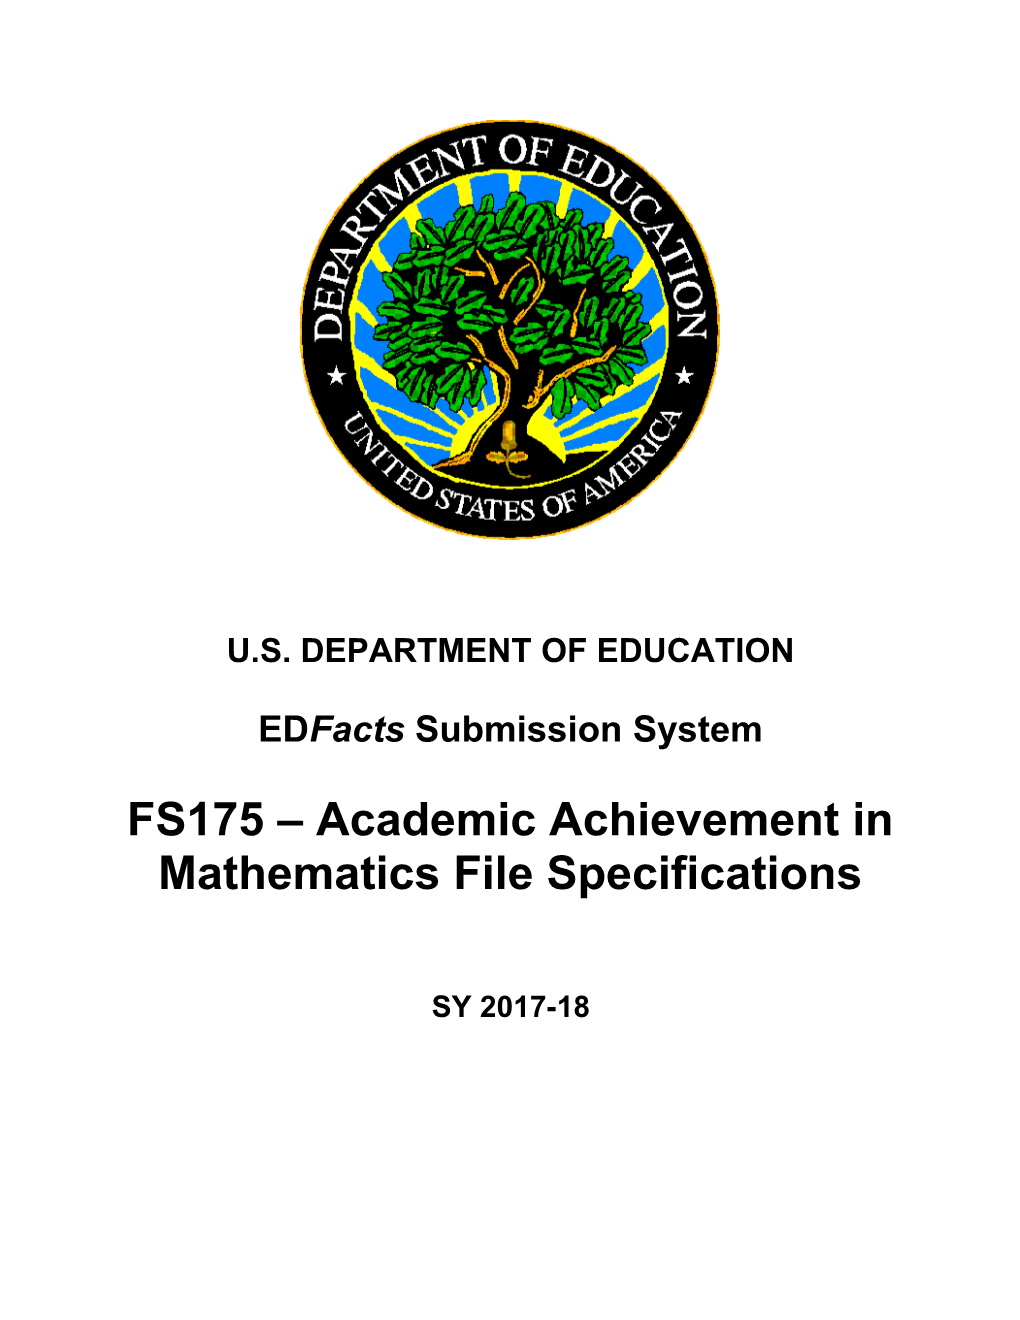 FS175 Academic Achievement in Mathematics File Specifications (Msword)